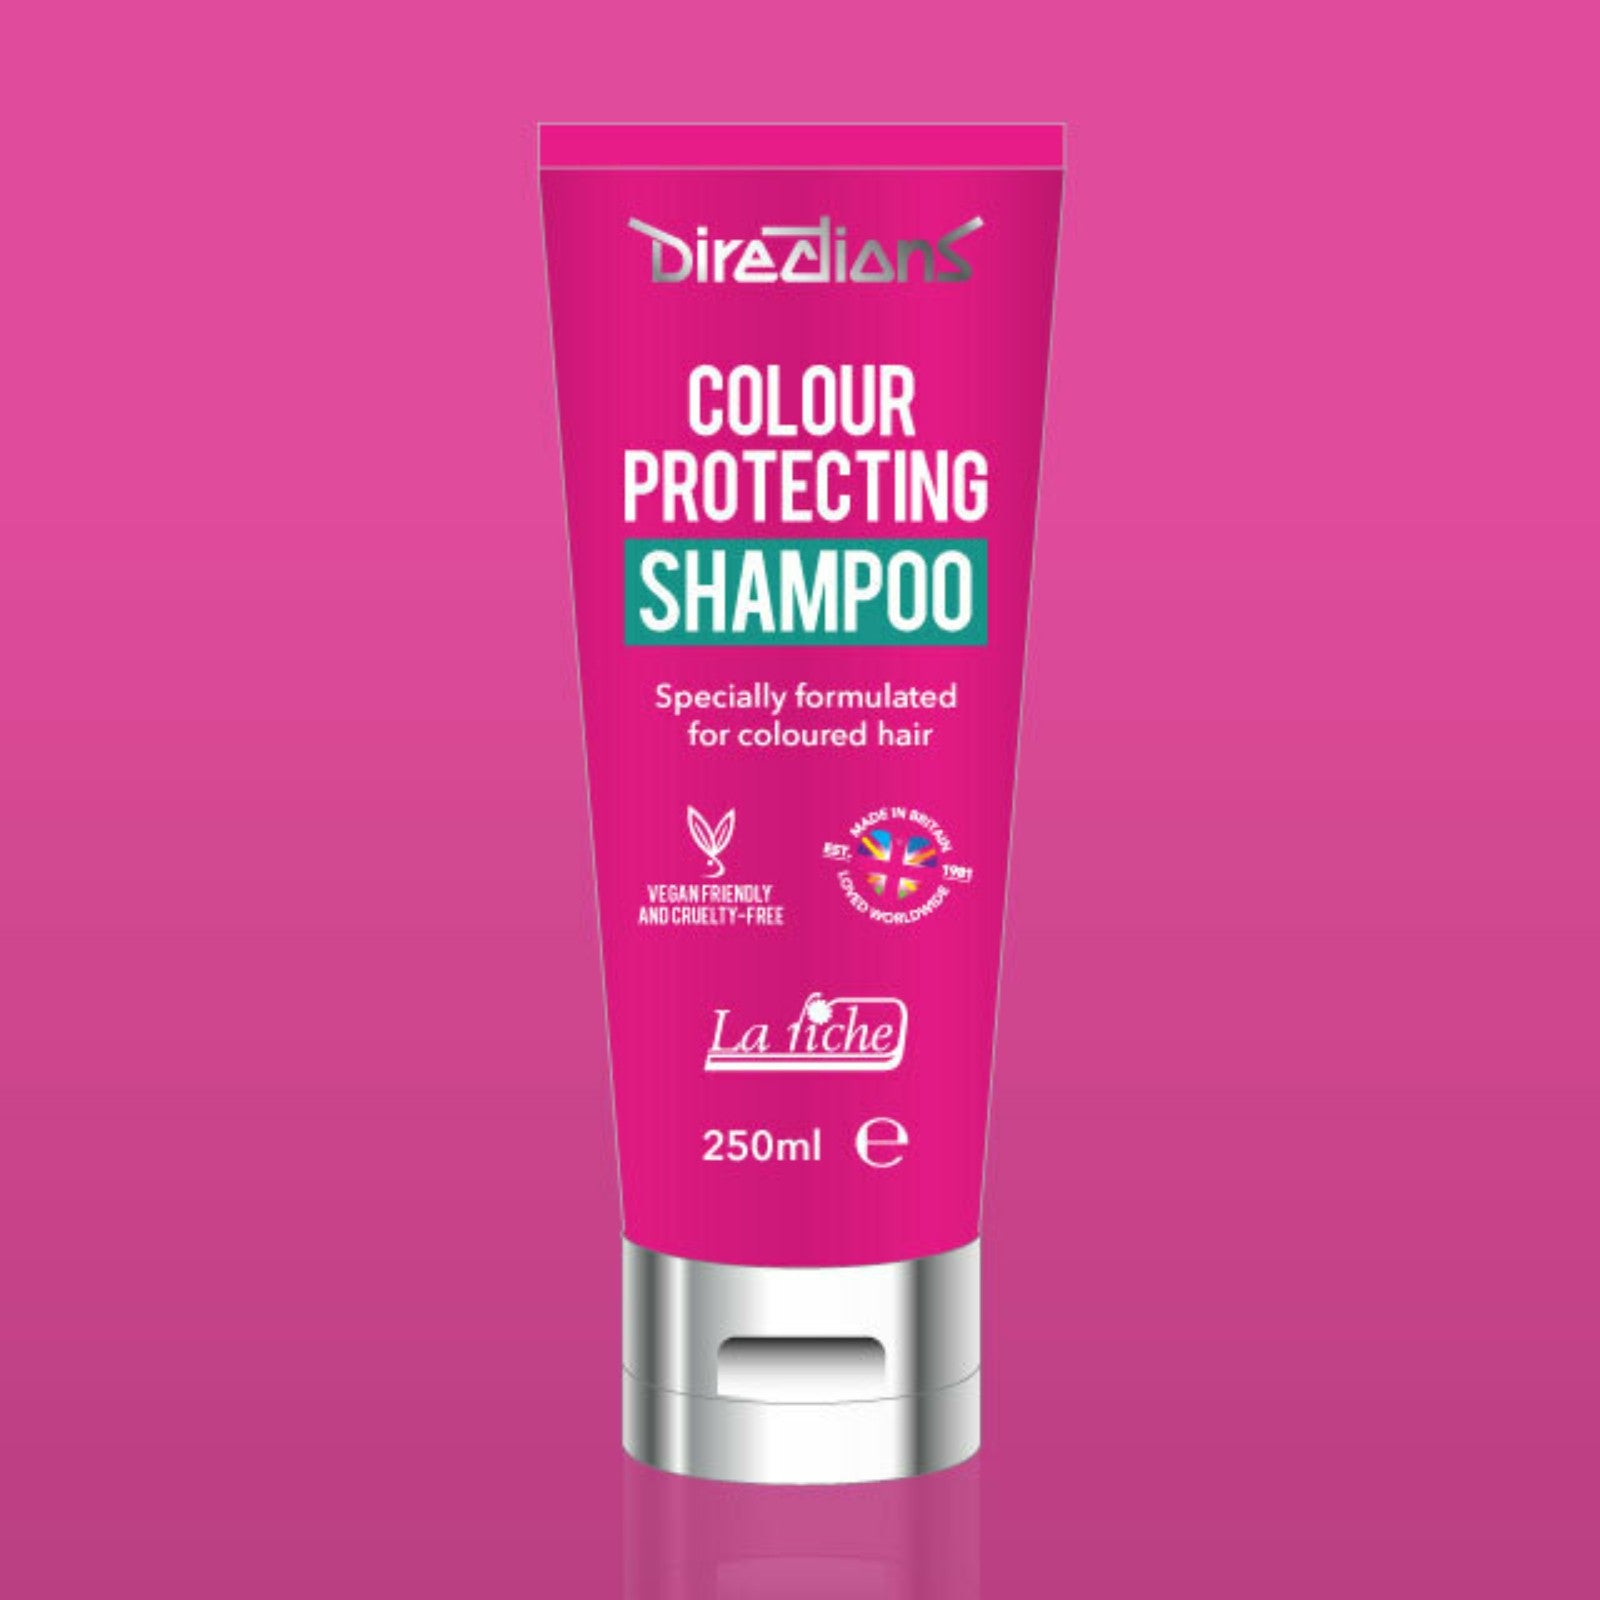 Directions Colour Protecting Shampoo, 250ml